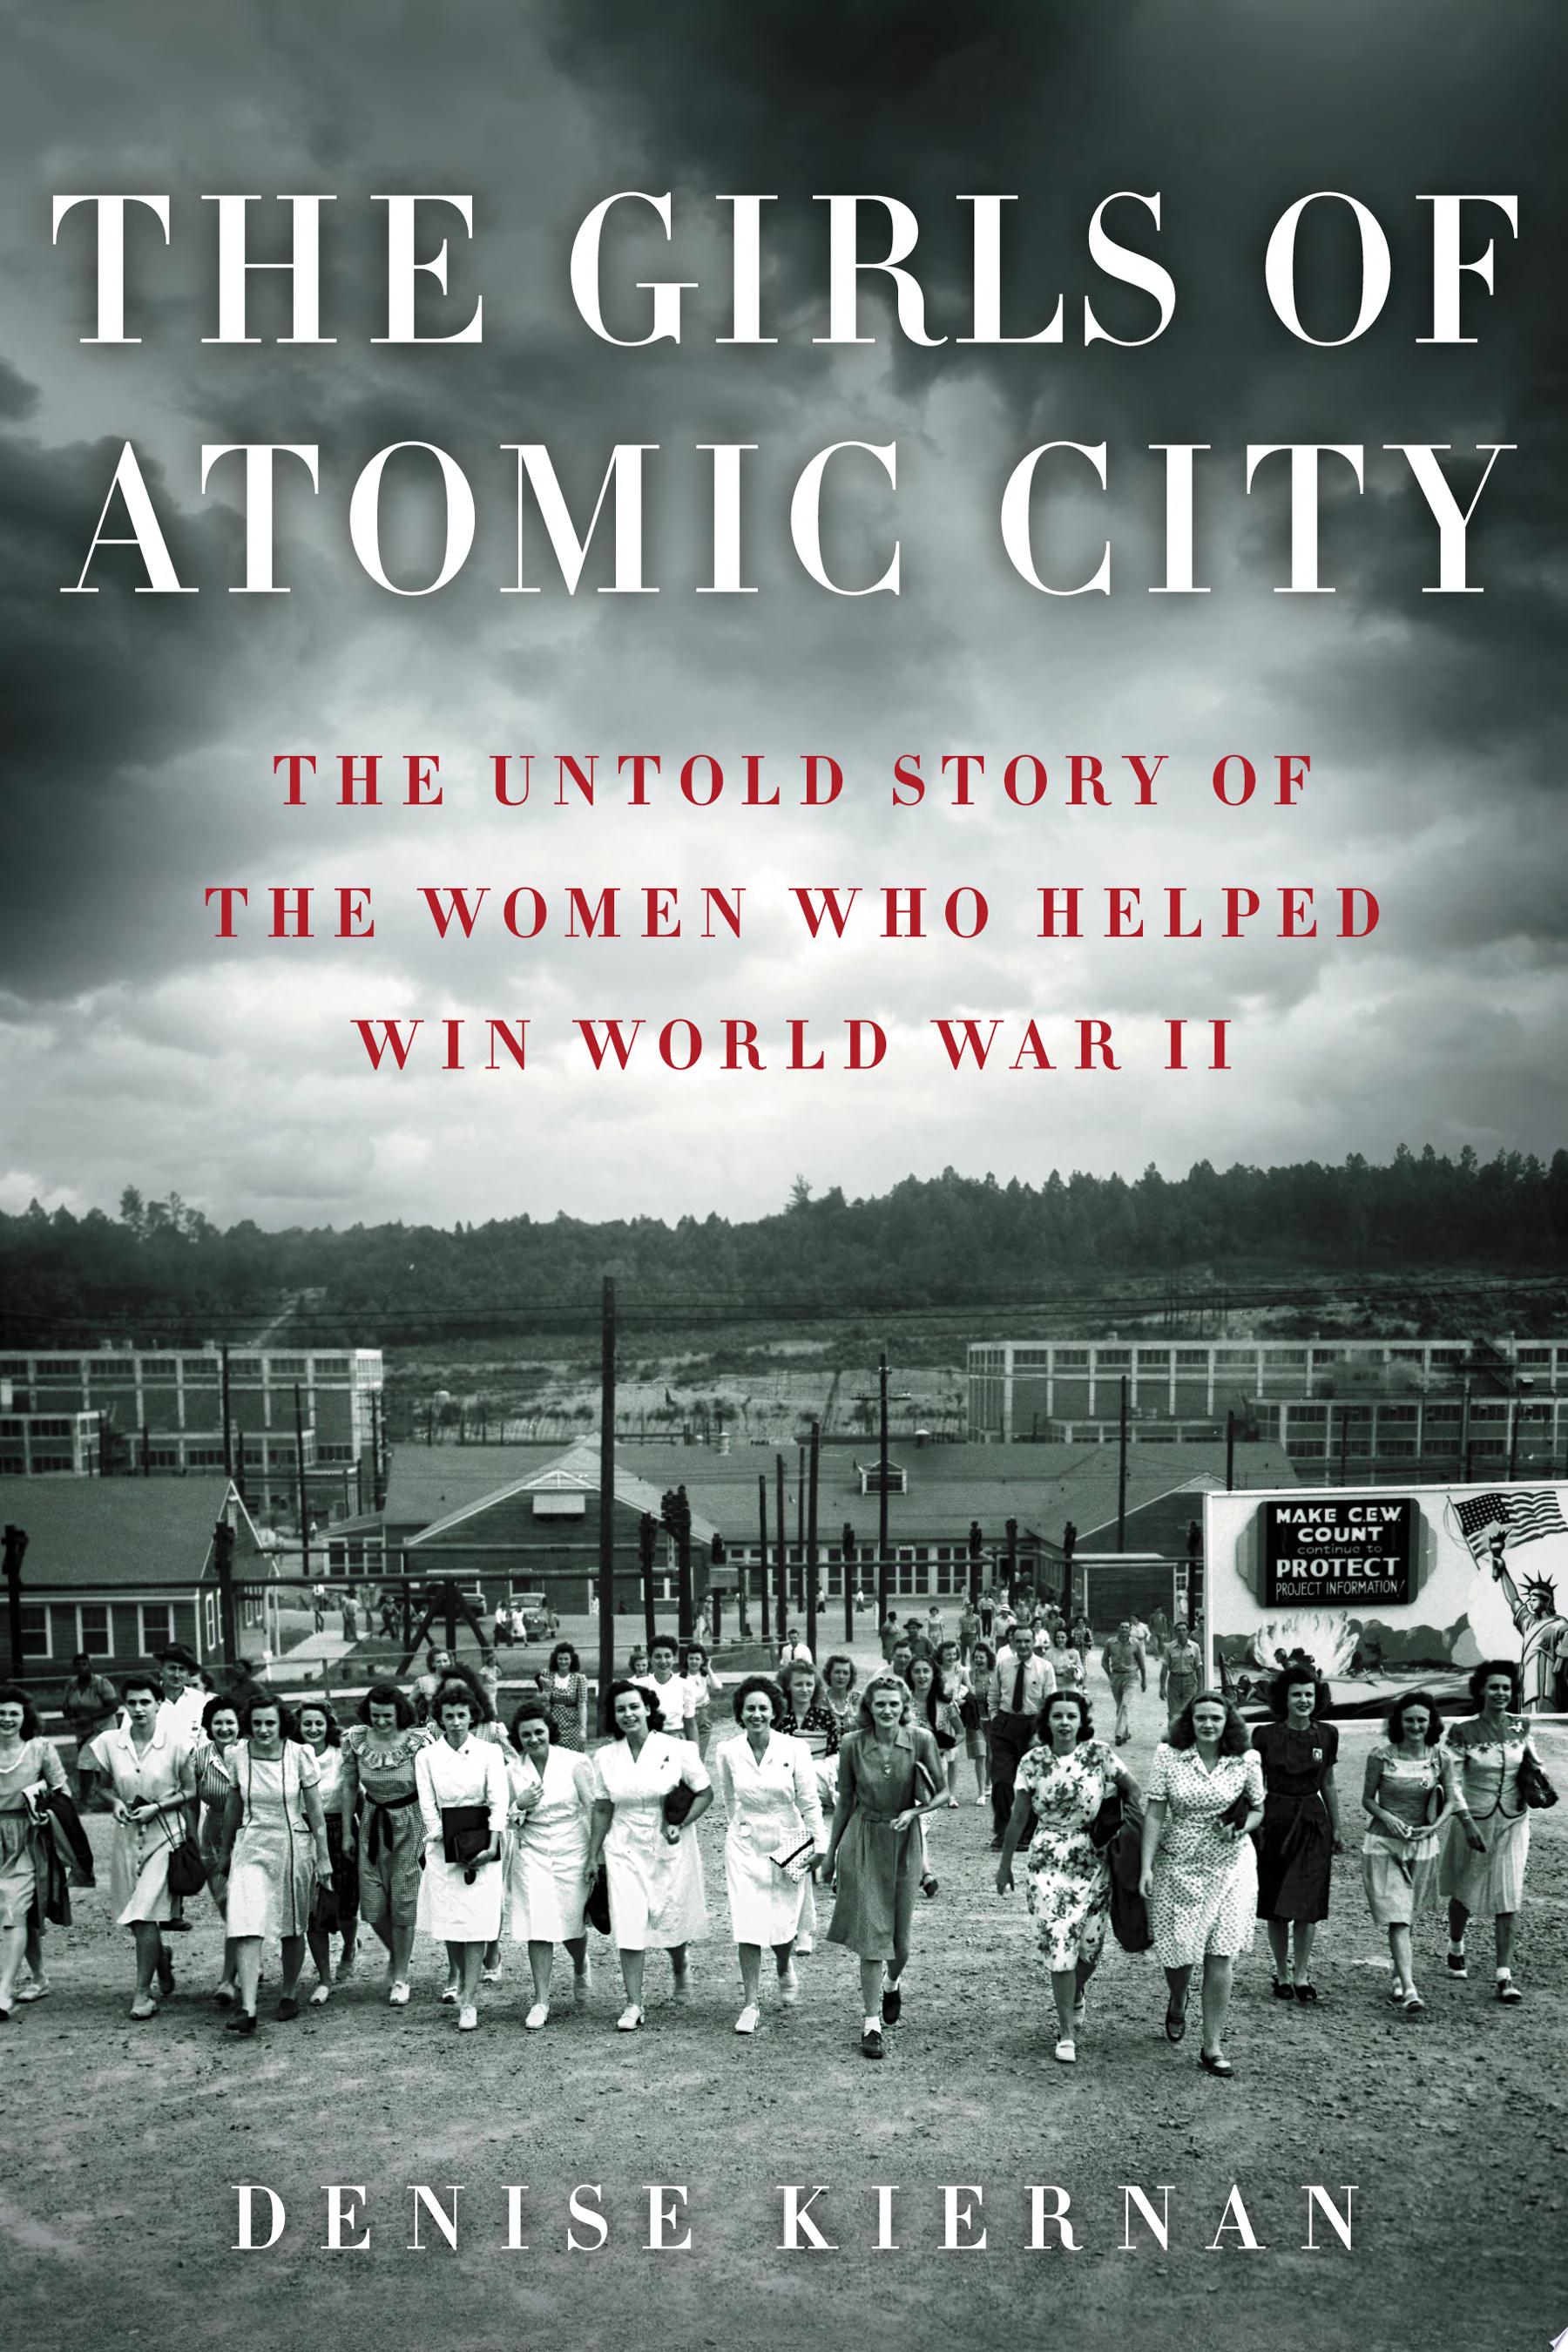 Image for "The Girls of Atomic City: the untold story of the women who helped win World War II"